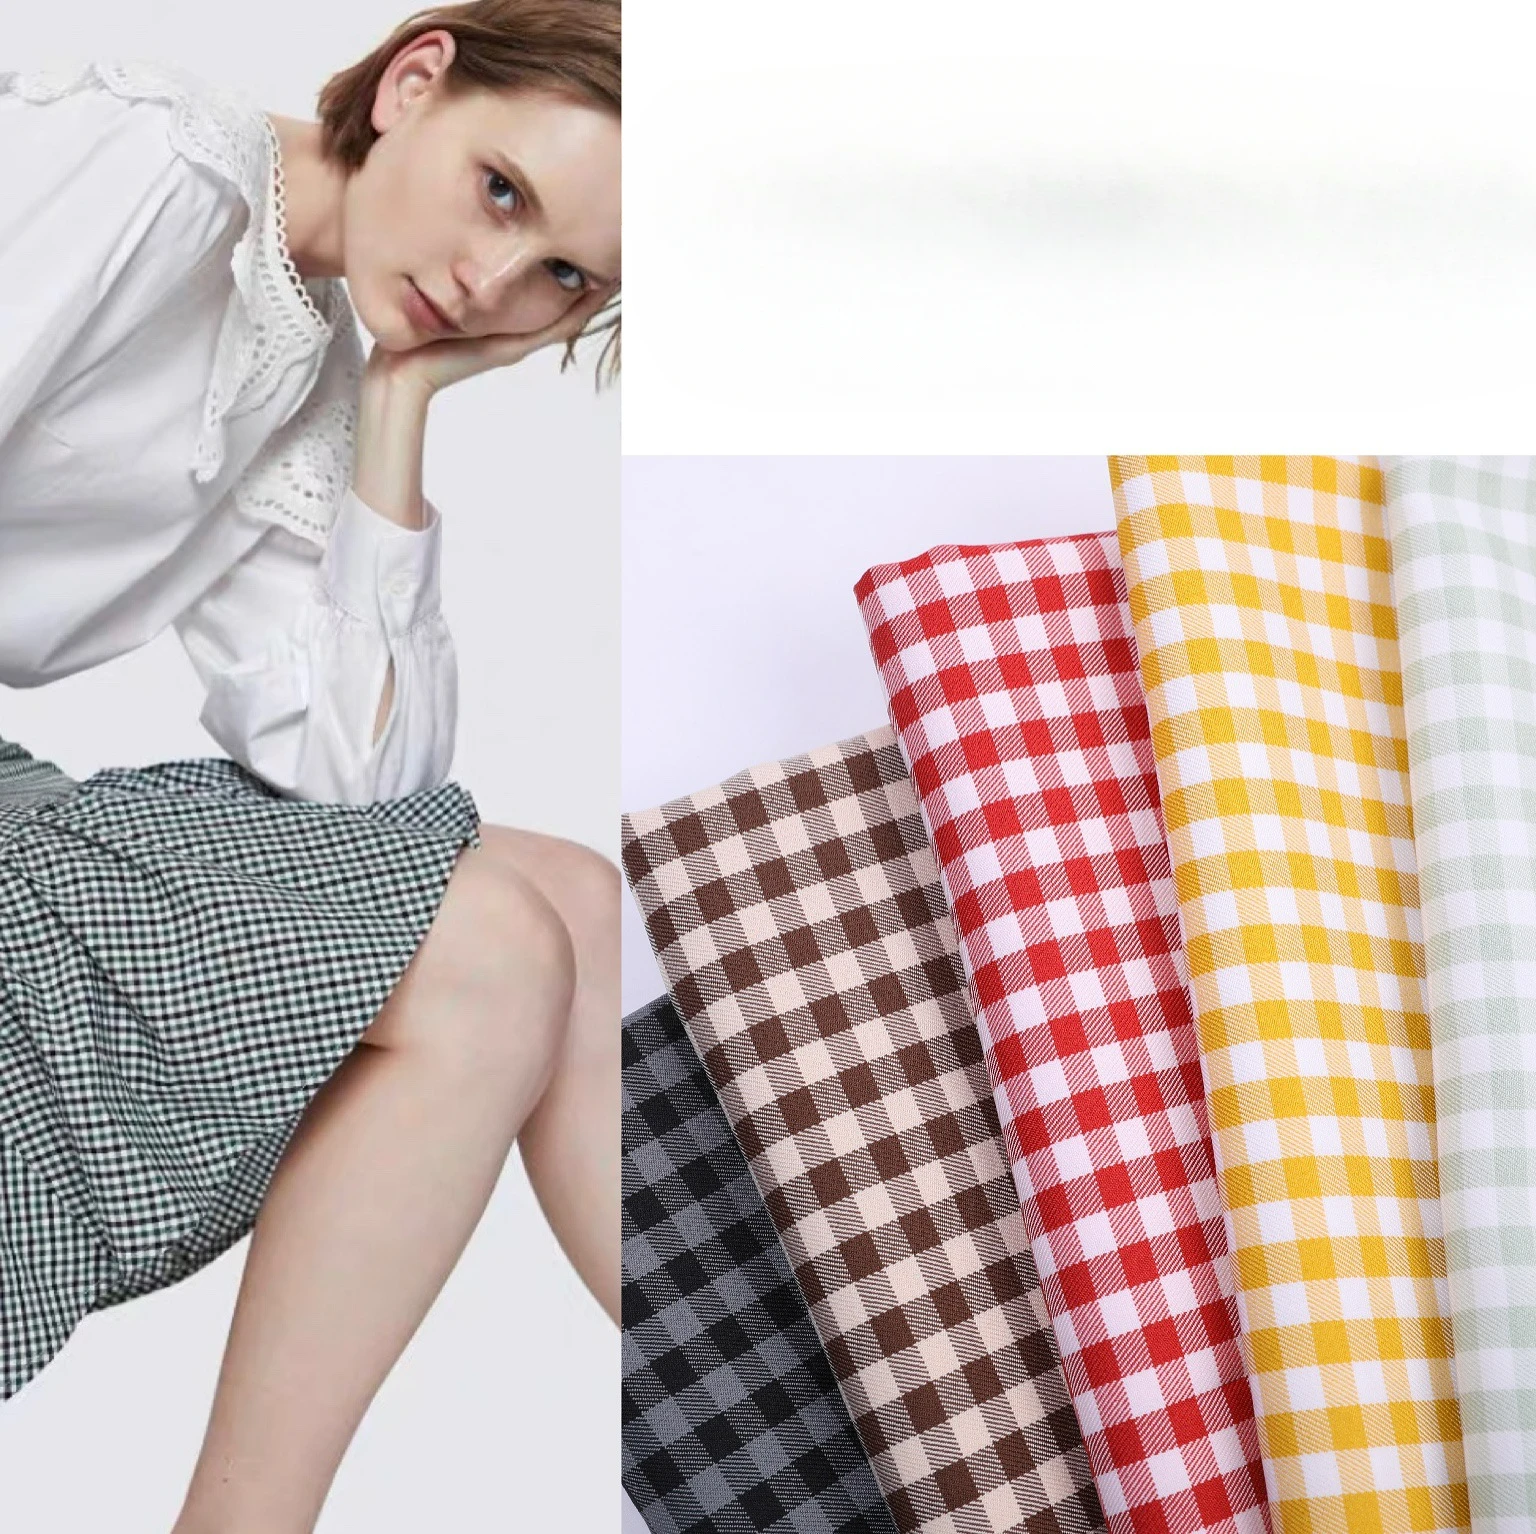 

Polyester Stretch Twill Yarn-dyed Chaoyang Plaid Fabric, Spring, Summer and Autumn Men's and Women's Shirts, Pants and Skirts